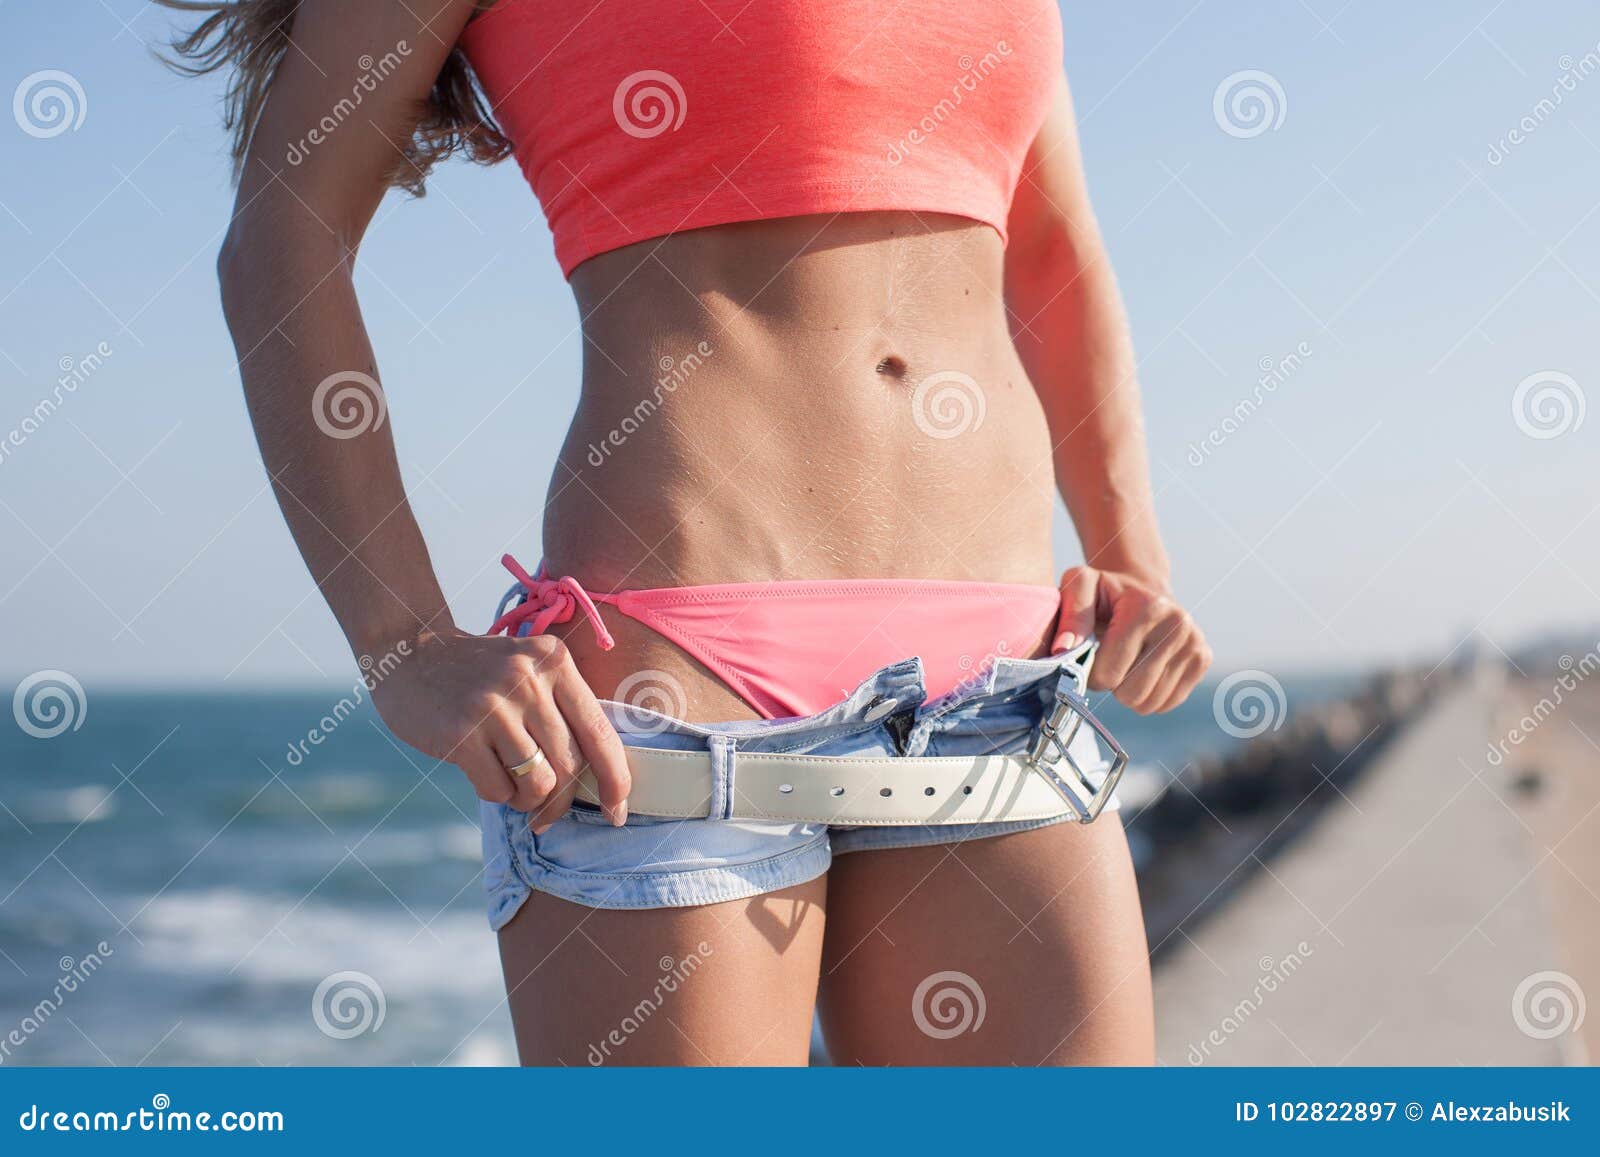 Part of Torso of Attractive Young Woman with Sagging Pants Stock Image -  Image of fragment, akimbo: 102822897